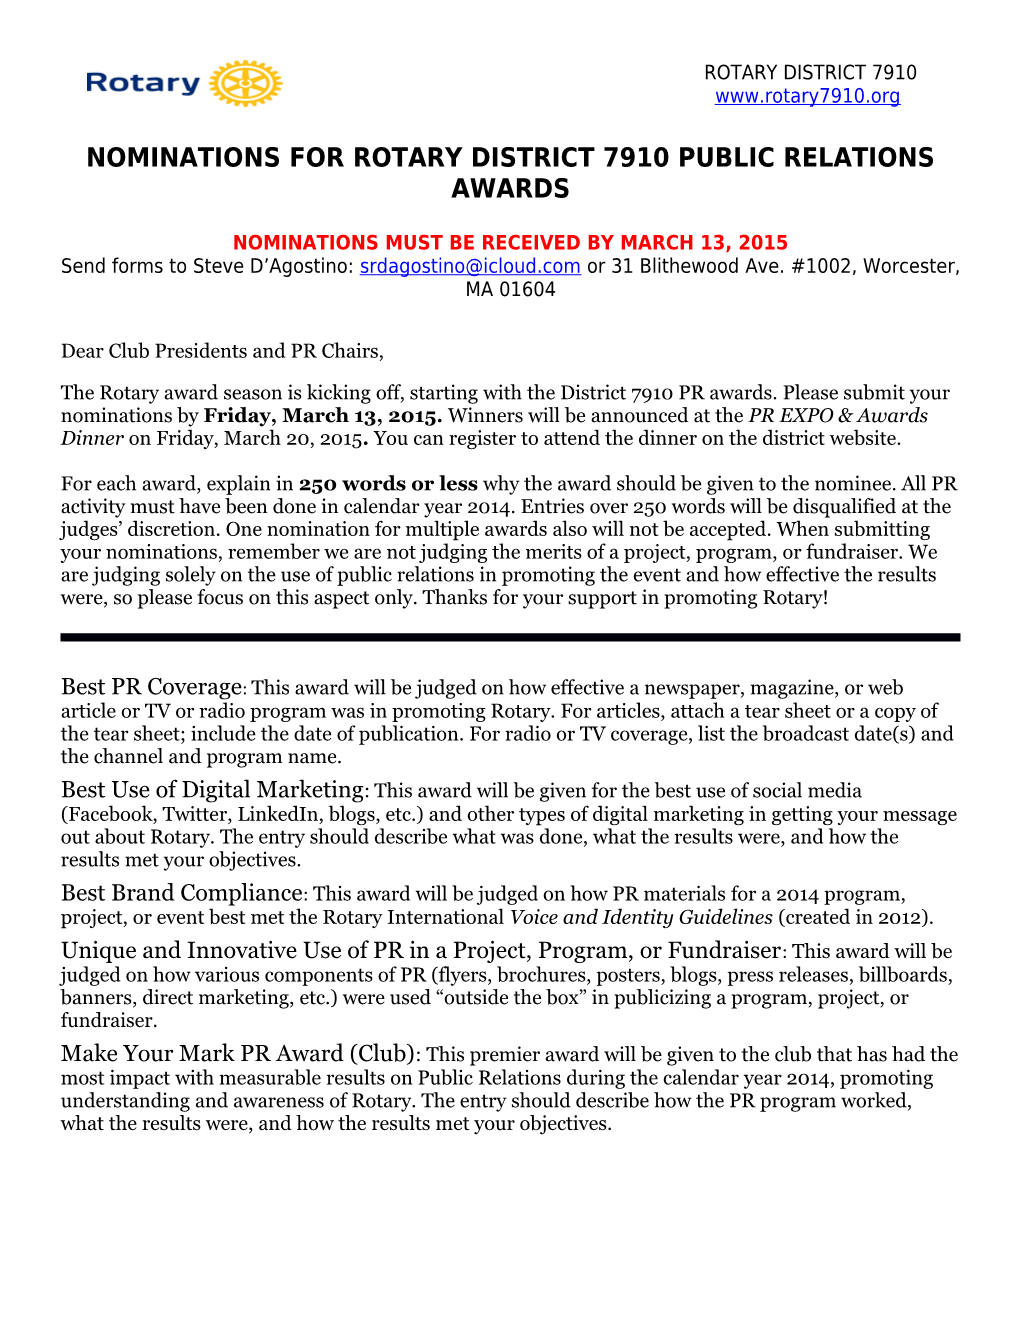 Nominations for Public Relations Awards